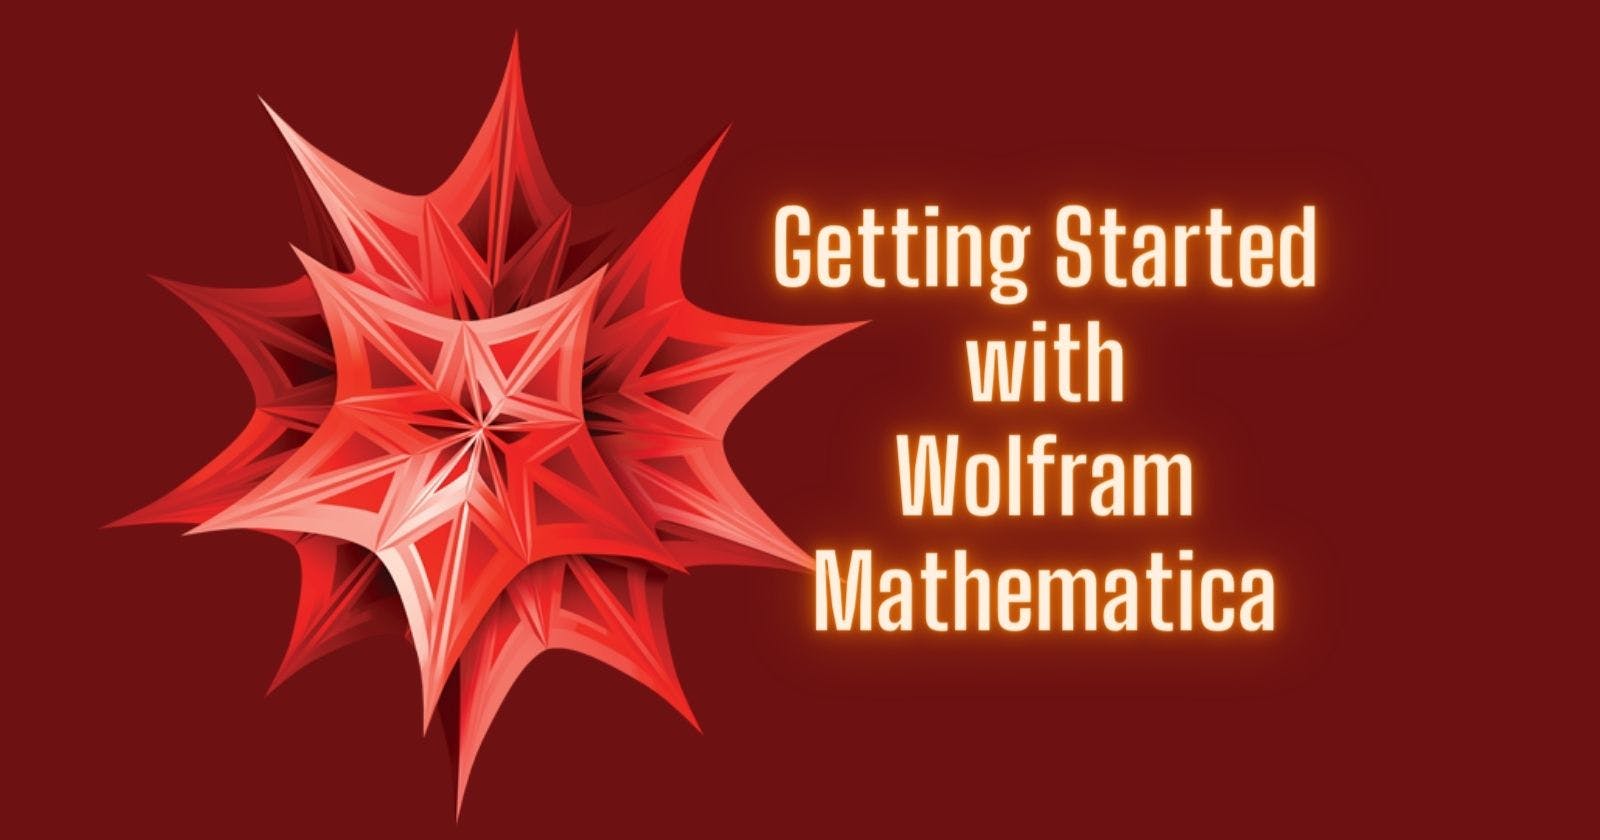 Getting Started with Wolfram Mathematica